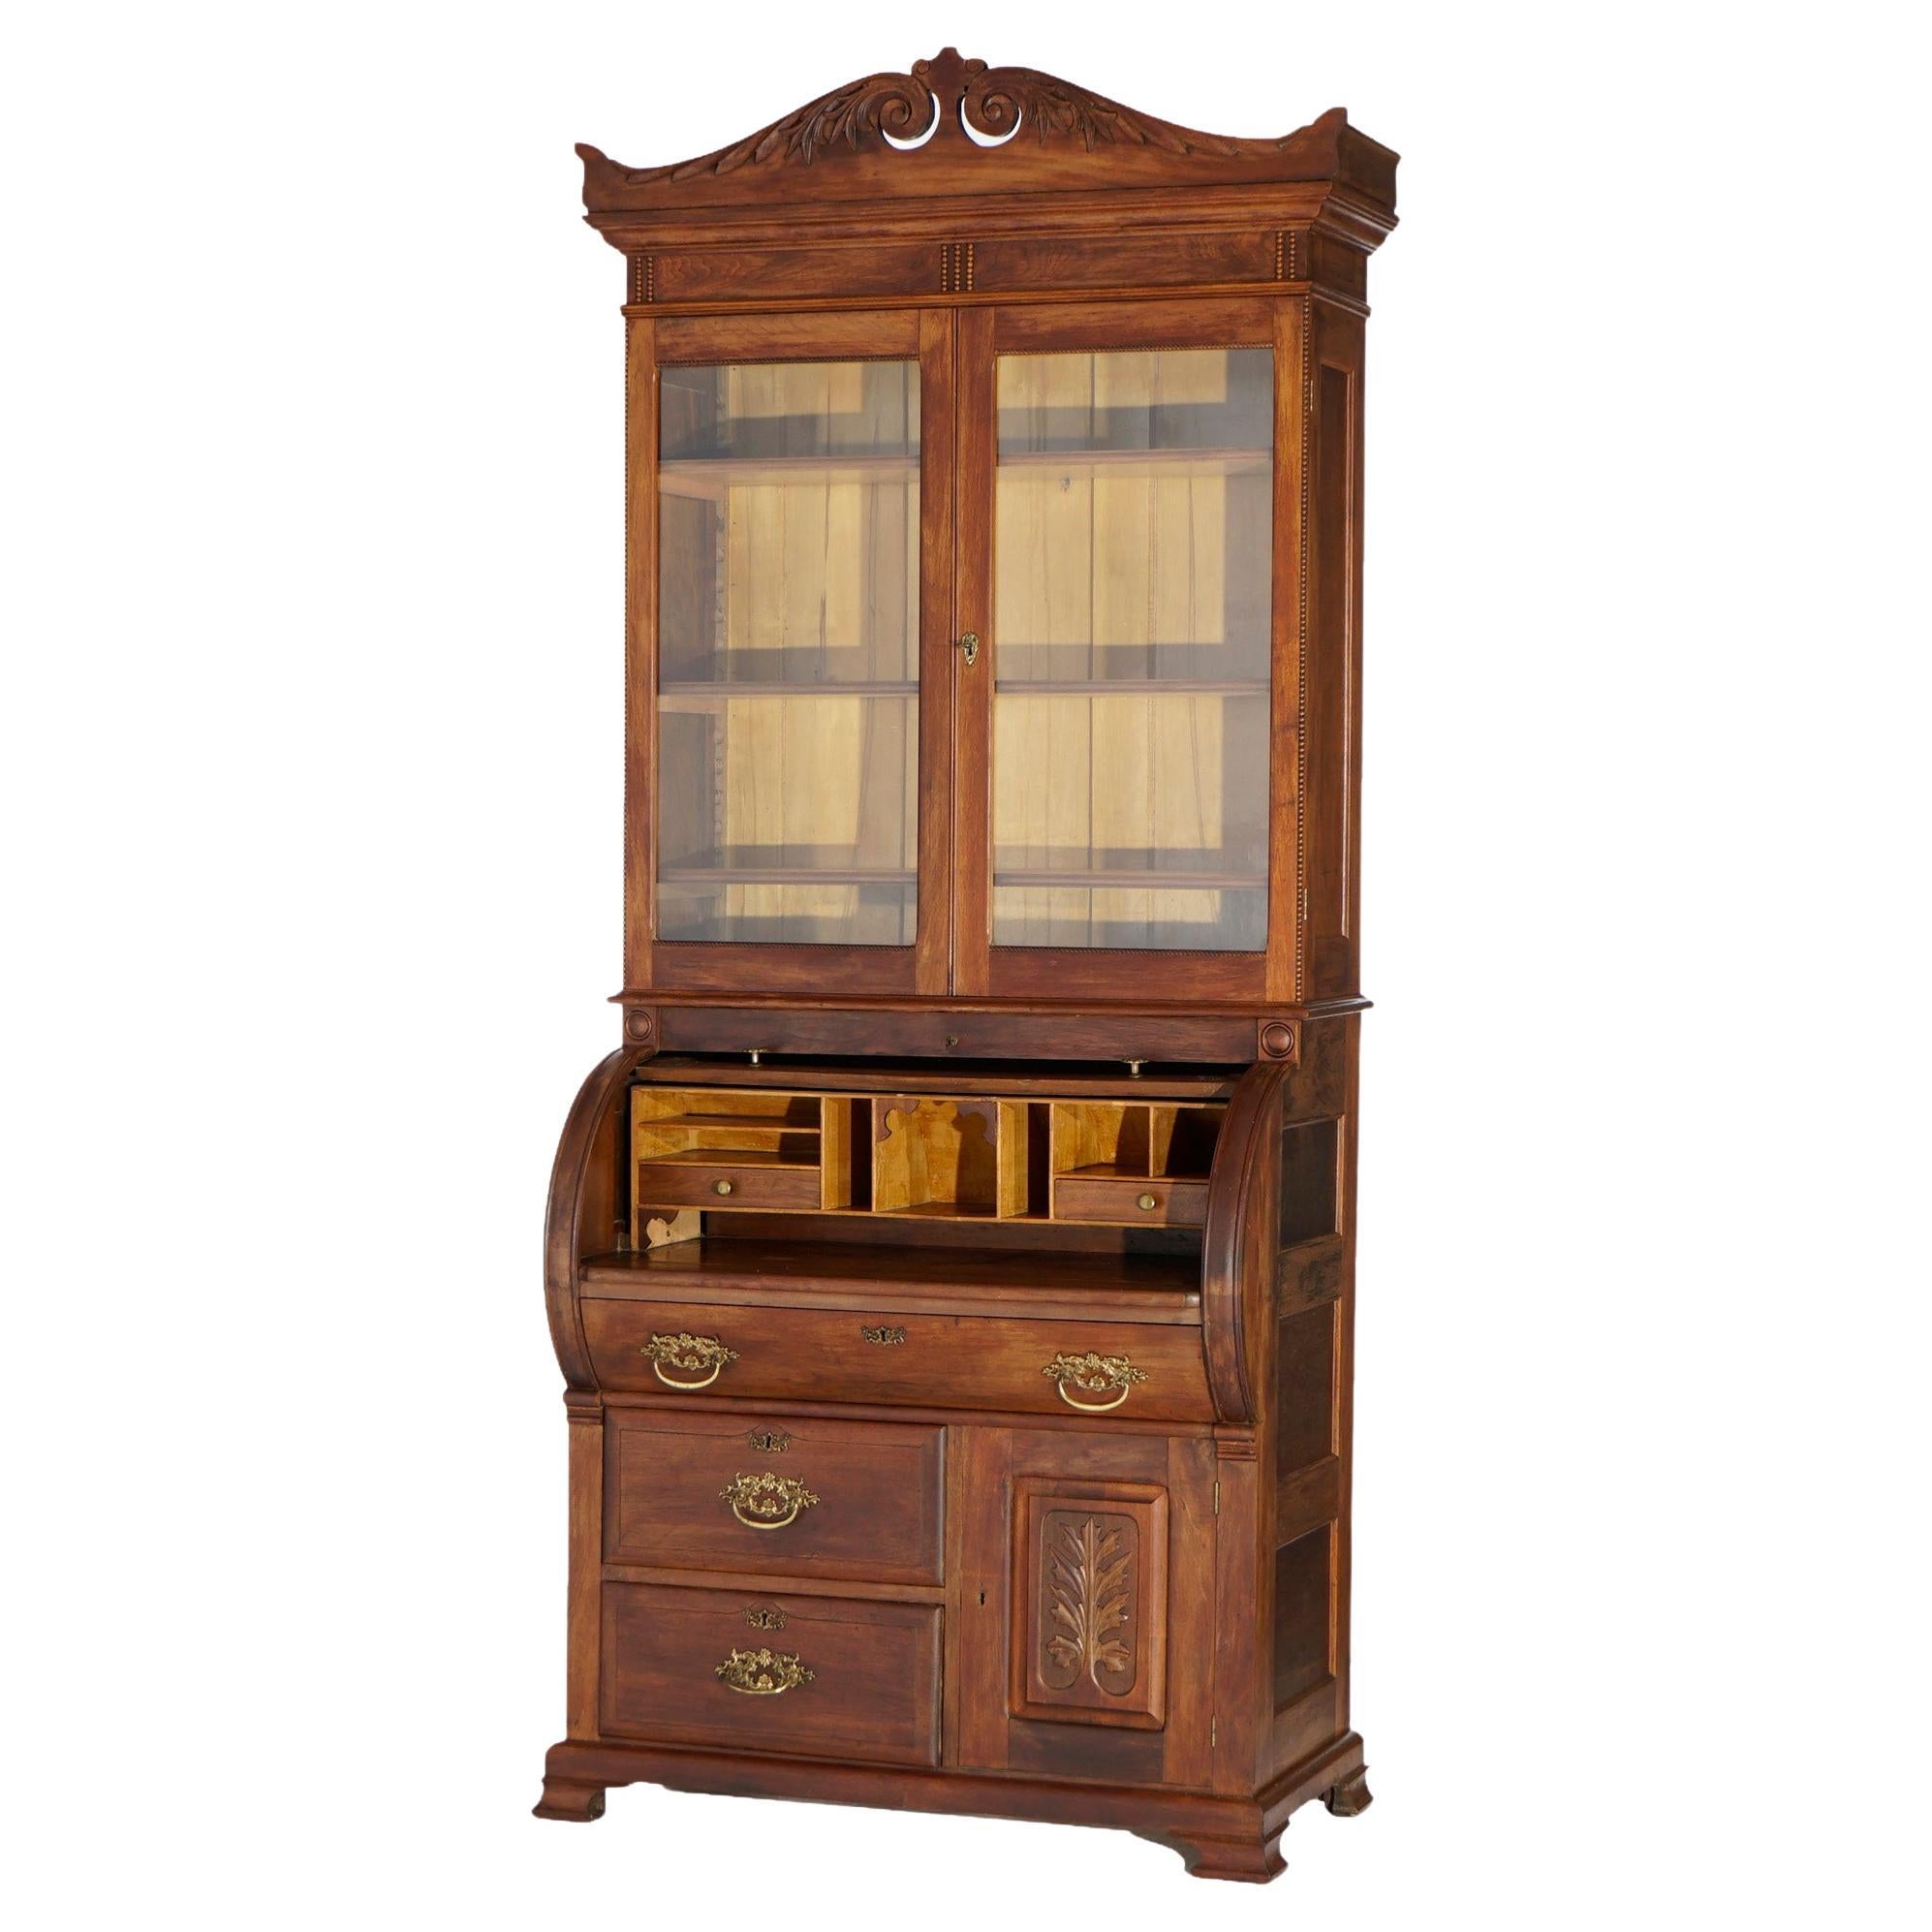 An antique secretary offers walnut and burl paneled construction with upper bookcase having broken arch crest over double glass door case seated on desk with cylinder opening to writing surface and storage compartments and lower drawers and cabinet